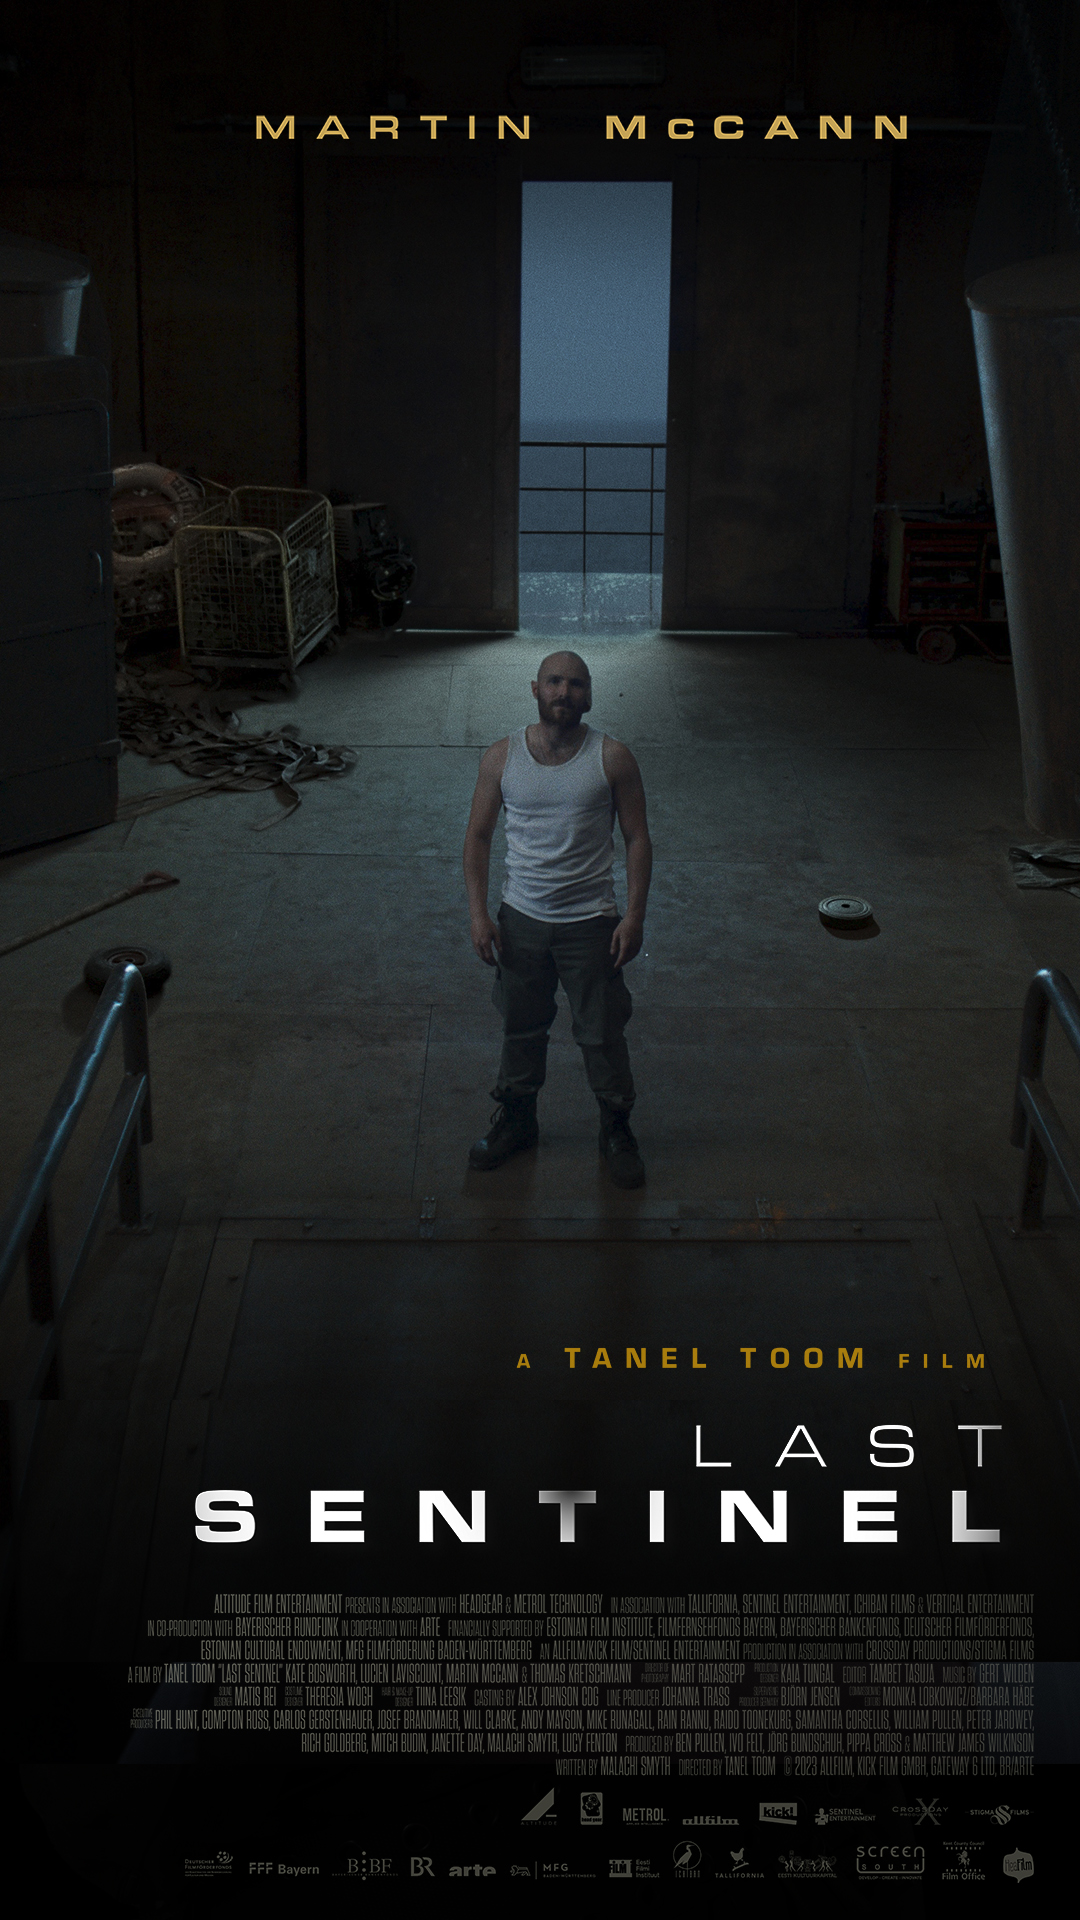 Watch Last Sentinel online in HD quality and free on Tornado Movies!